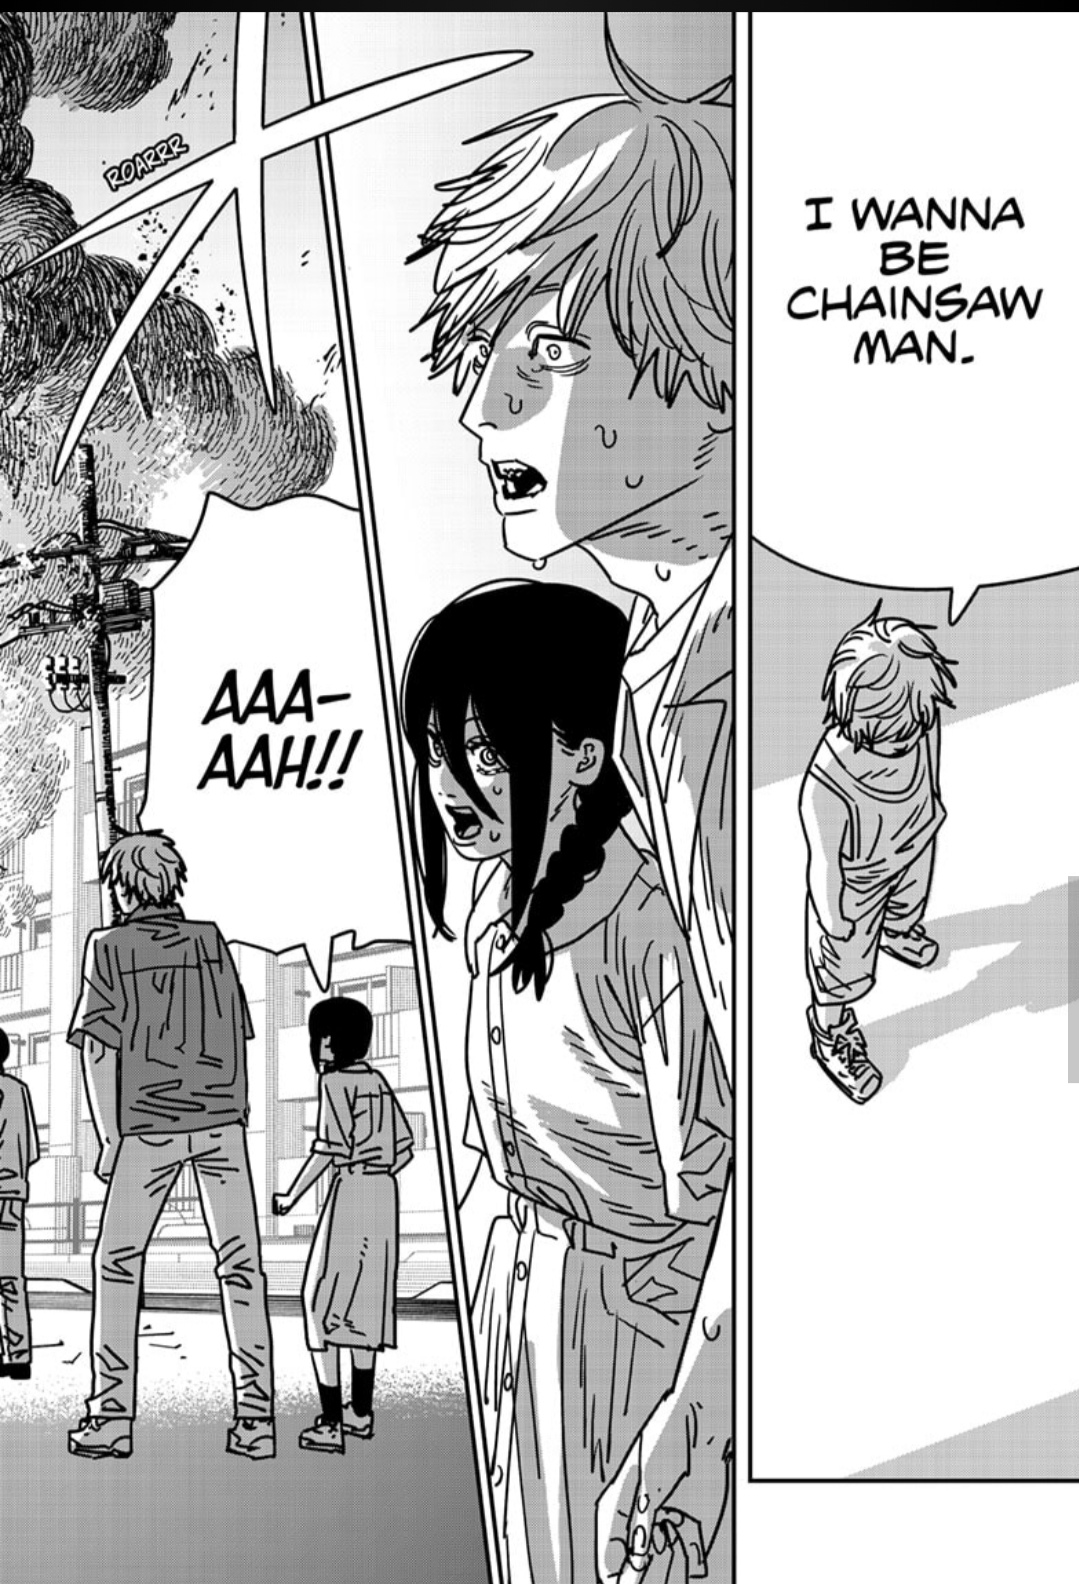 The Chainsaw Man Chapter 150: AVAILABLE NOW! in 2023